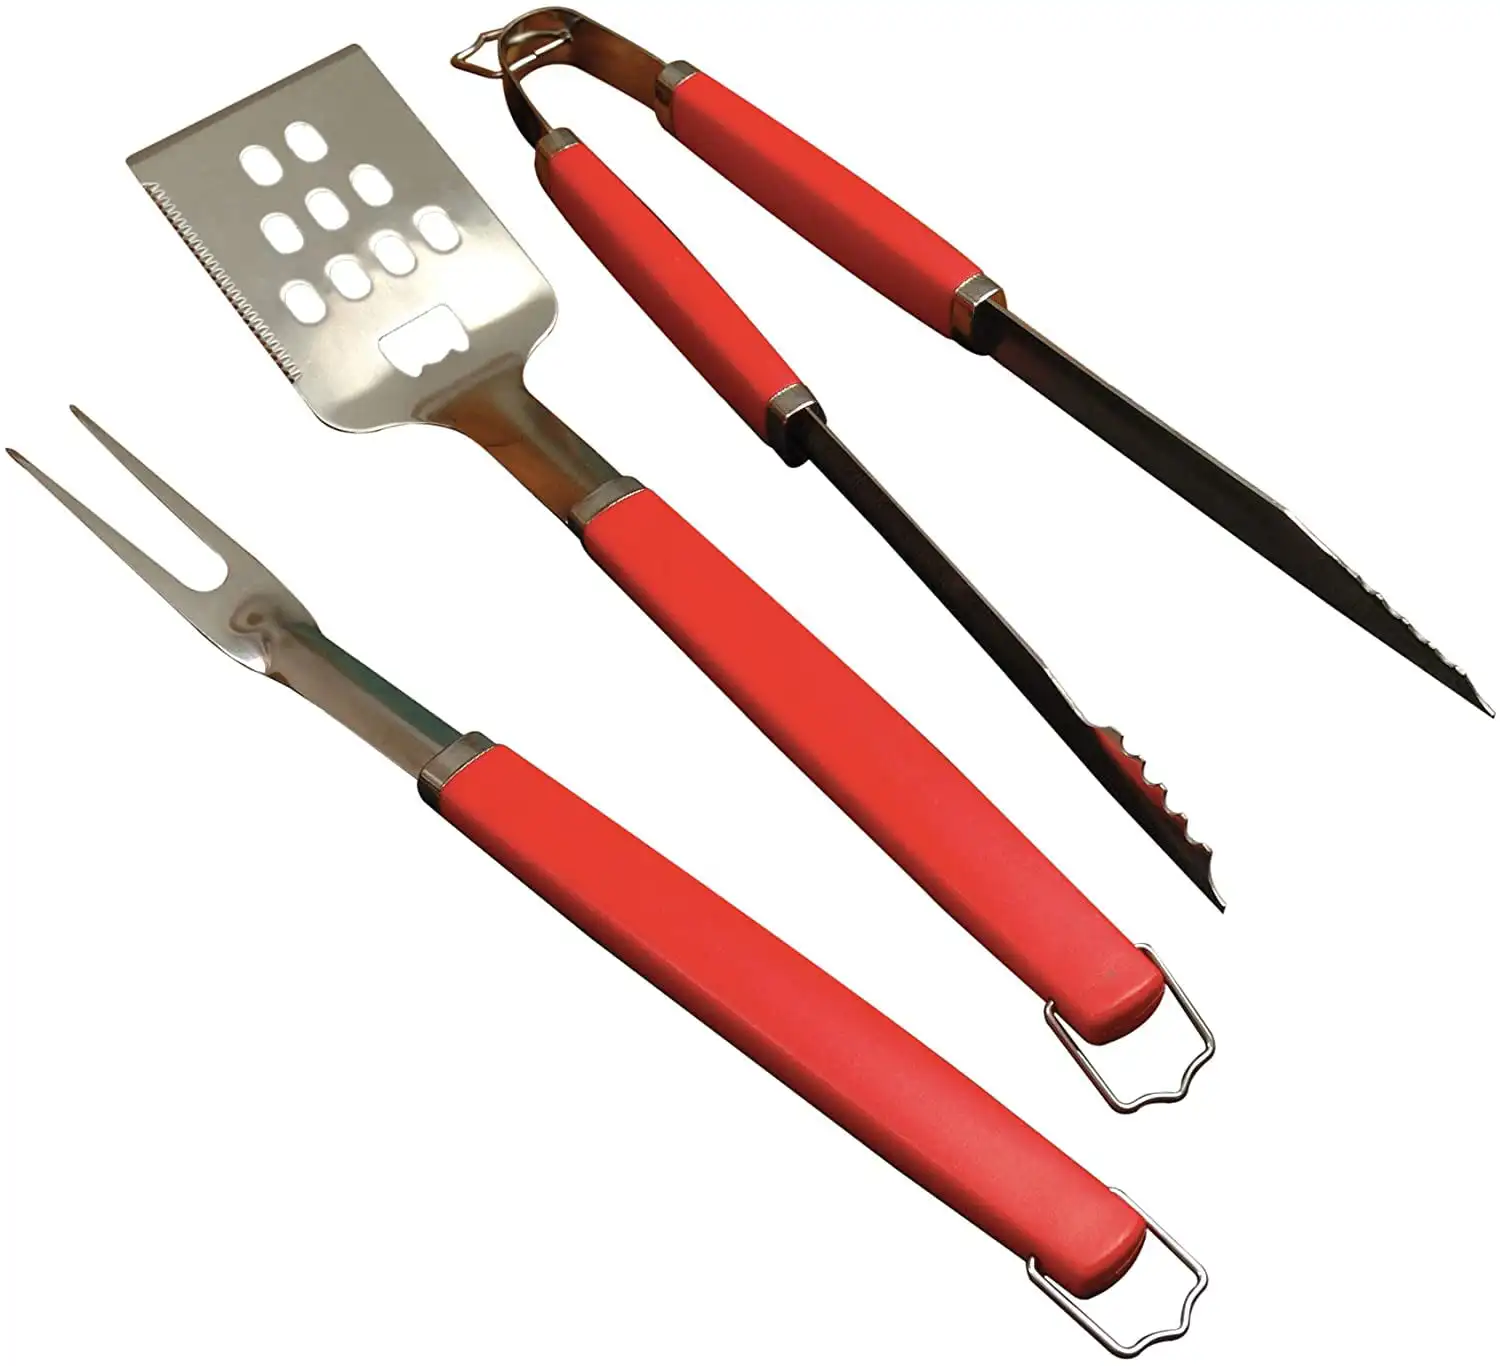 

Perfect Chef 3-piece Barbecue Tool Set with Red Handle